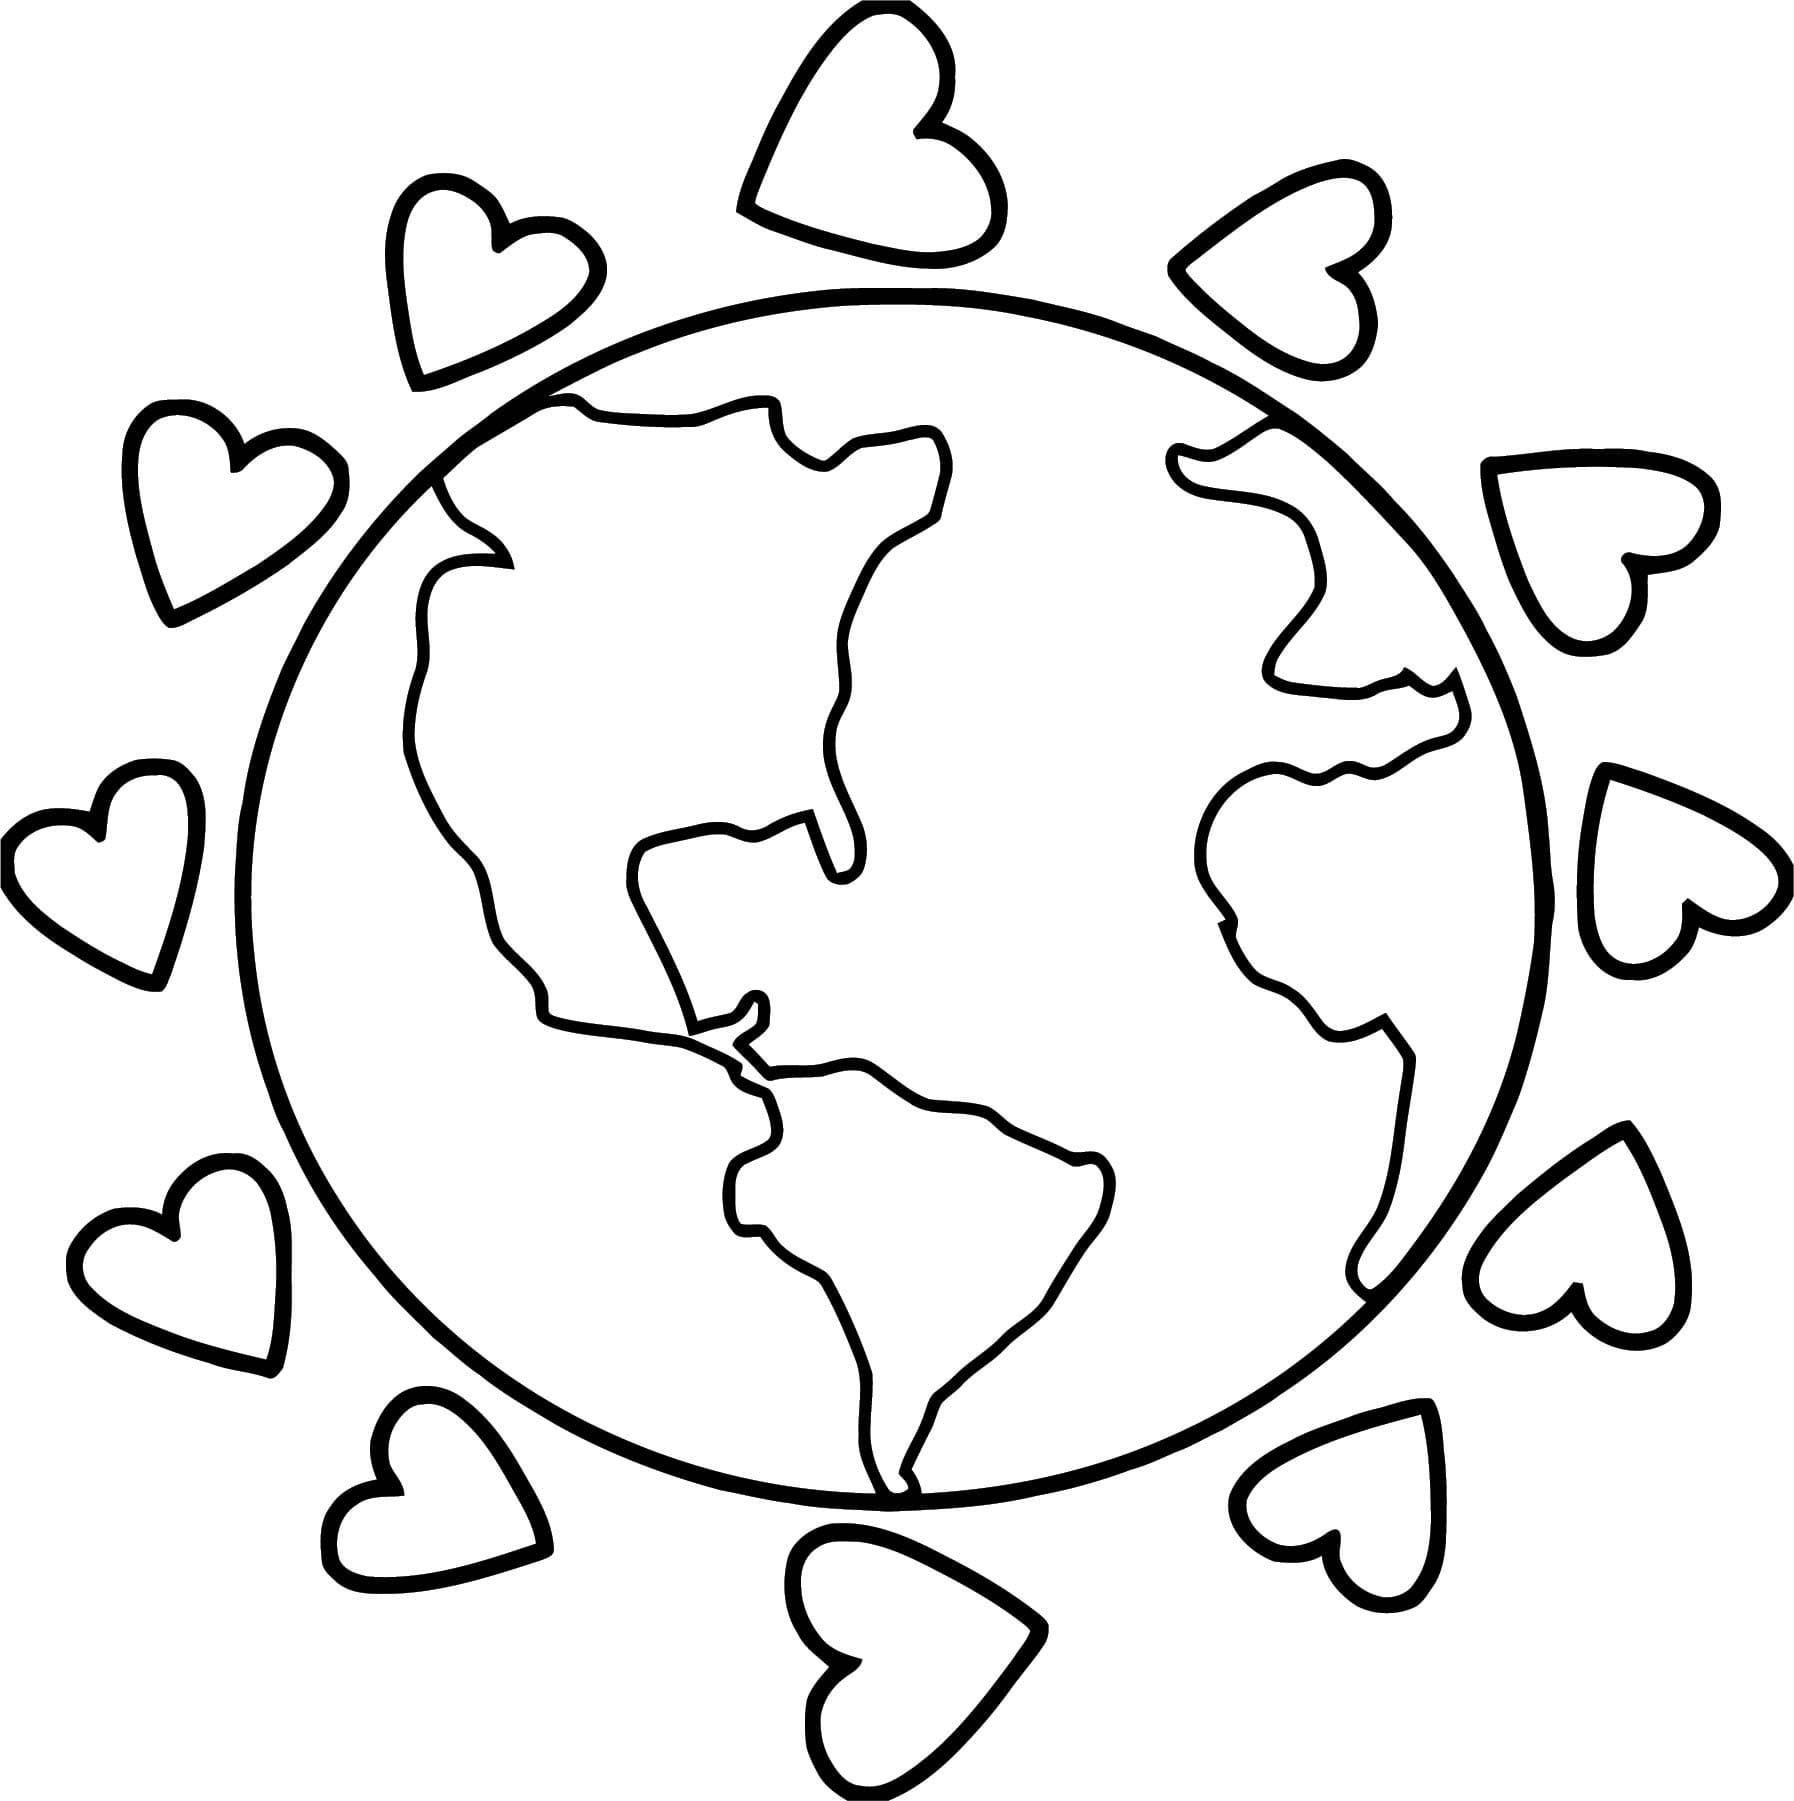 Earth Coloring Pages | 100 Pictures Free Printable